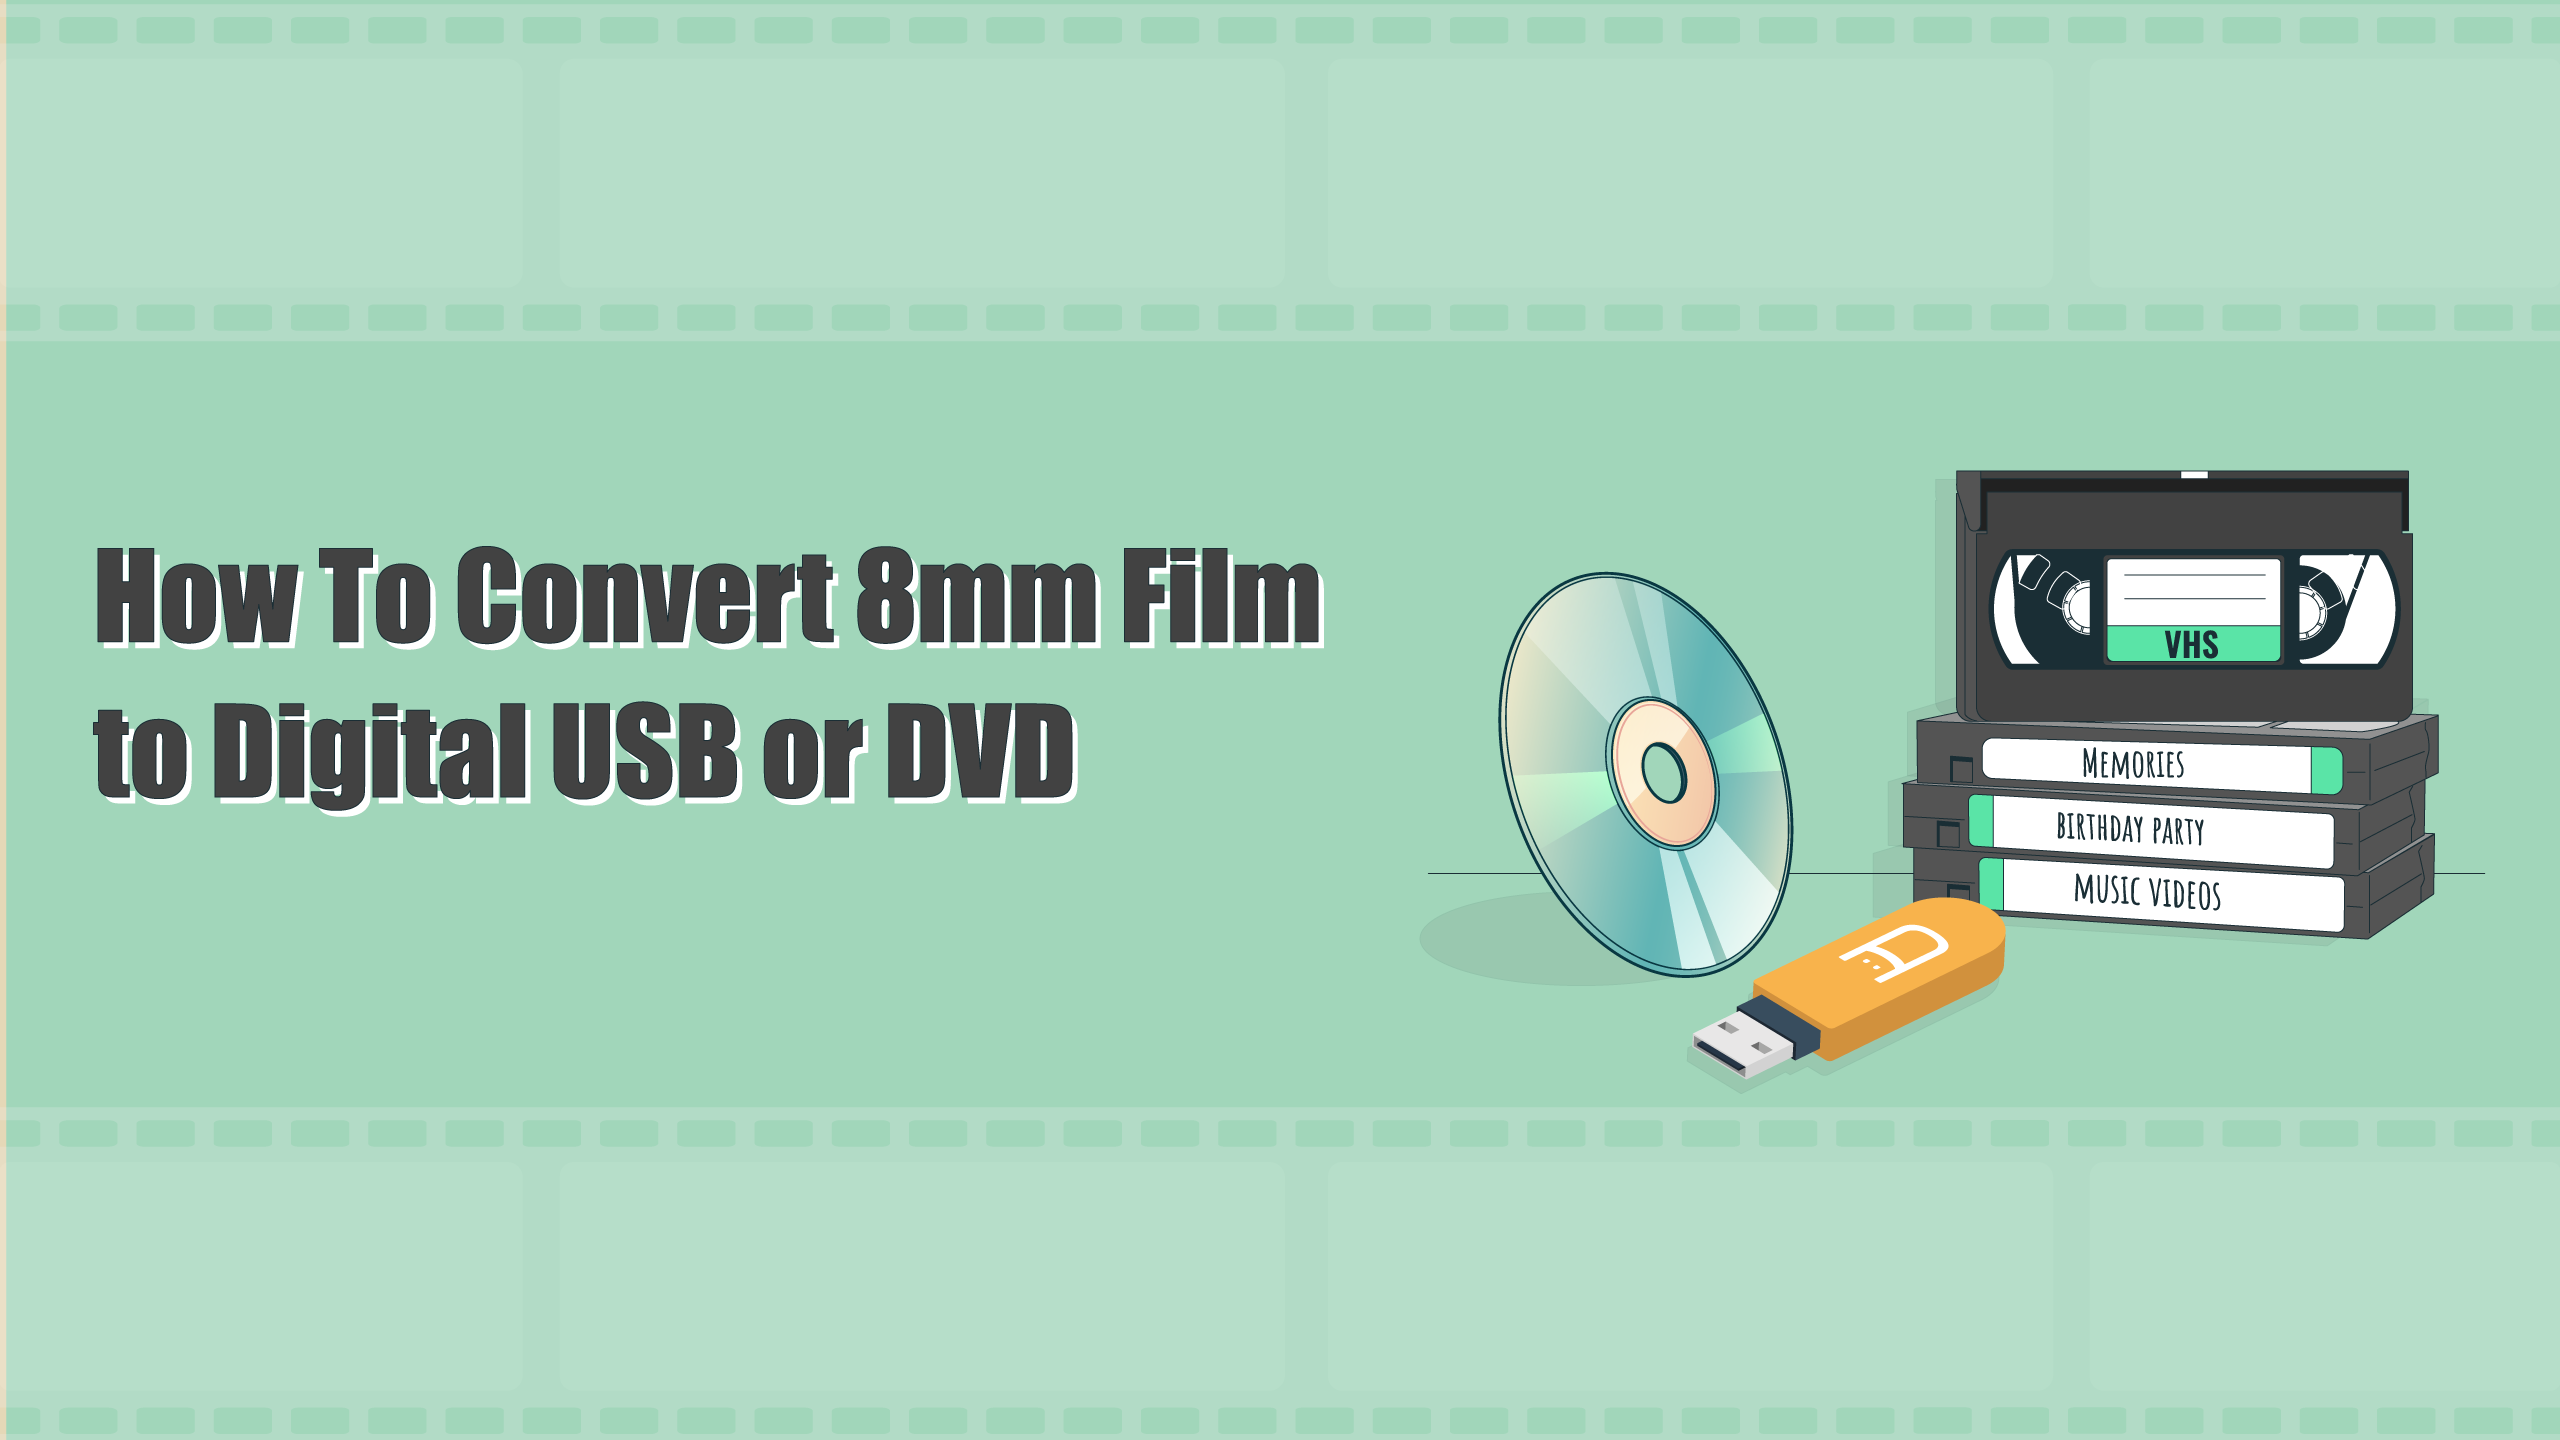 How To Convert 8mm Film to Digital for USB